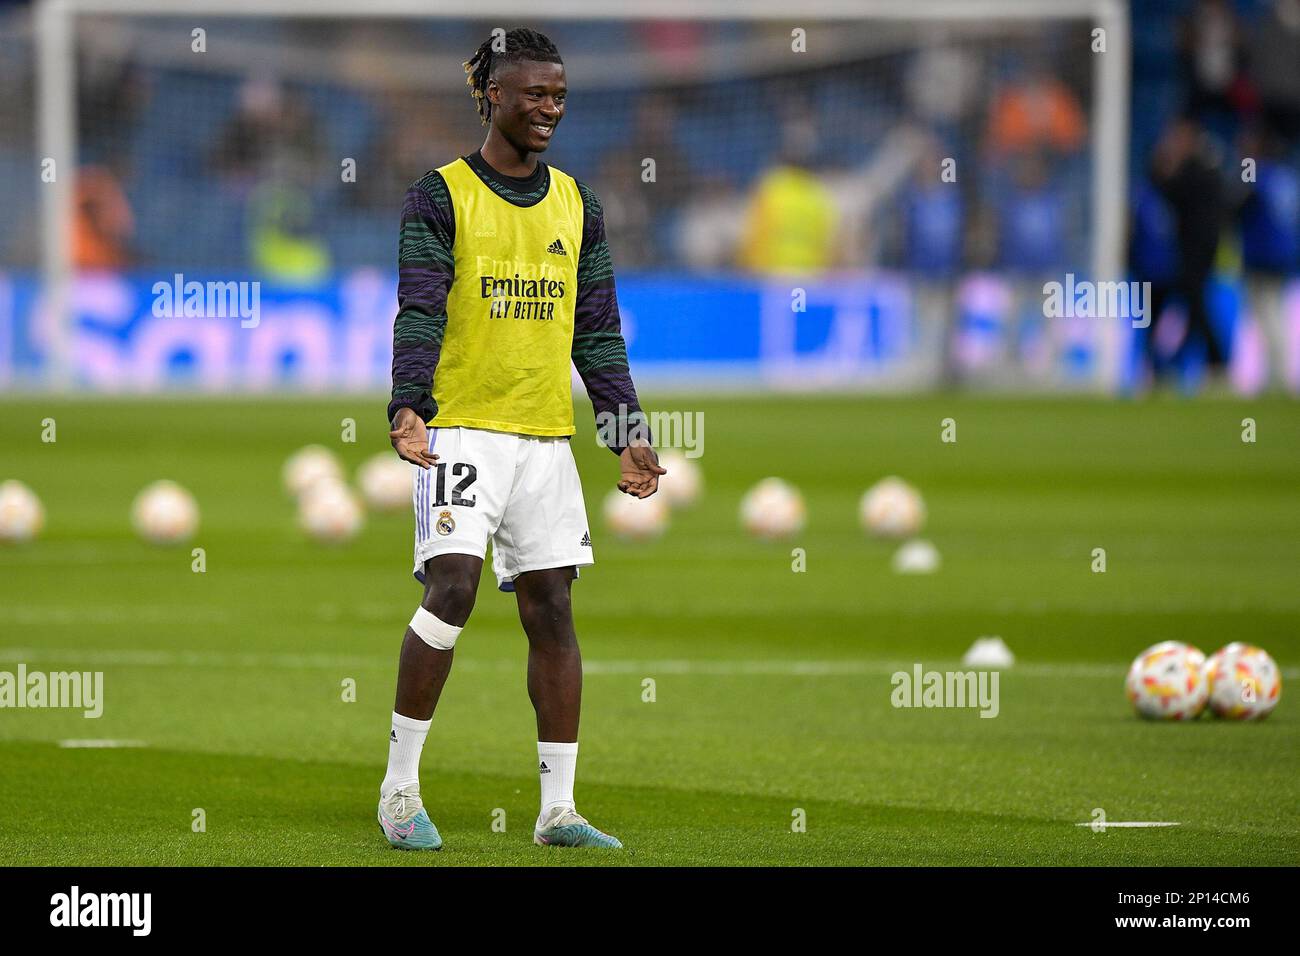 MADRID, SPAIN - MARCH 2: Eduardo Camavinga of Real Madrid prior to the Semi Final Leg One - Copa Del Rey match between Real Madrid CF and FC Barcelona at the Estadio Santiago Bernabeu on March 2, 2023 in Madrid, Spain (Photo by Pablo Morano/BSR Agency) Stock Photo